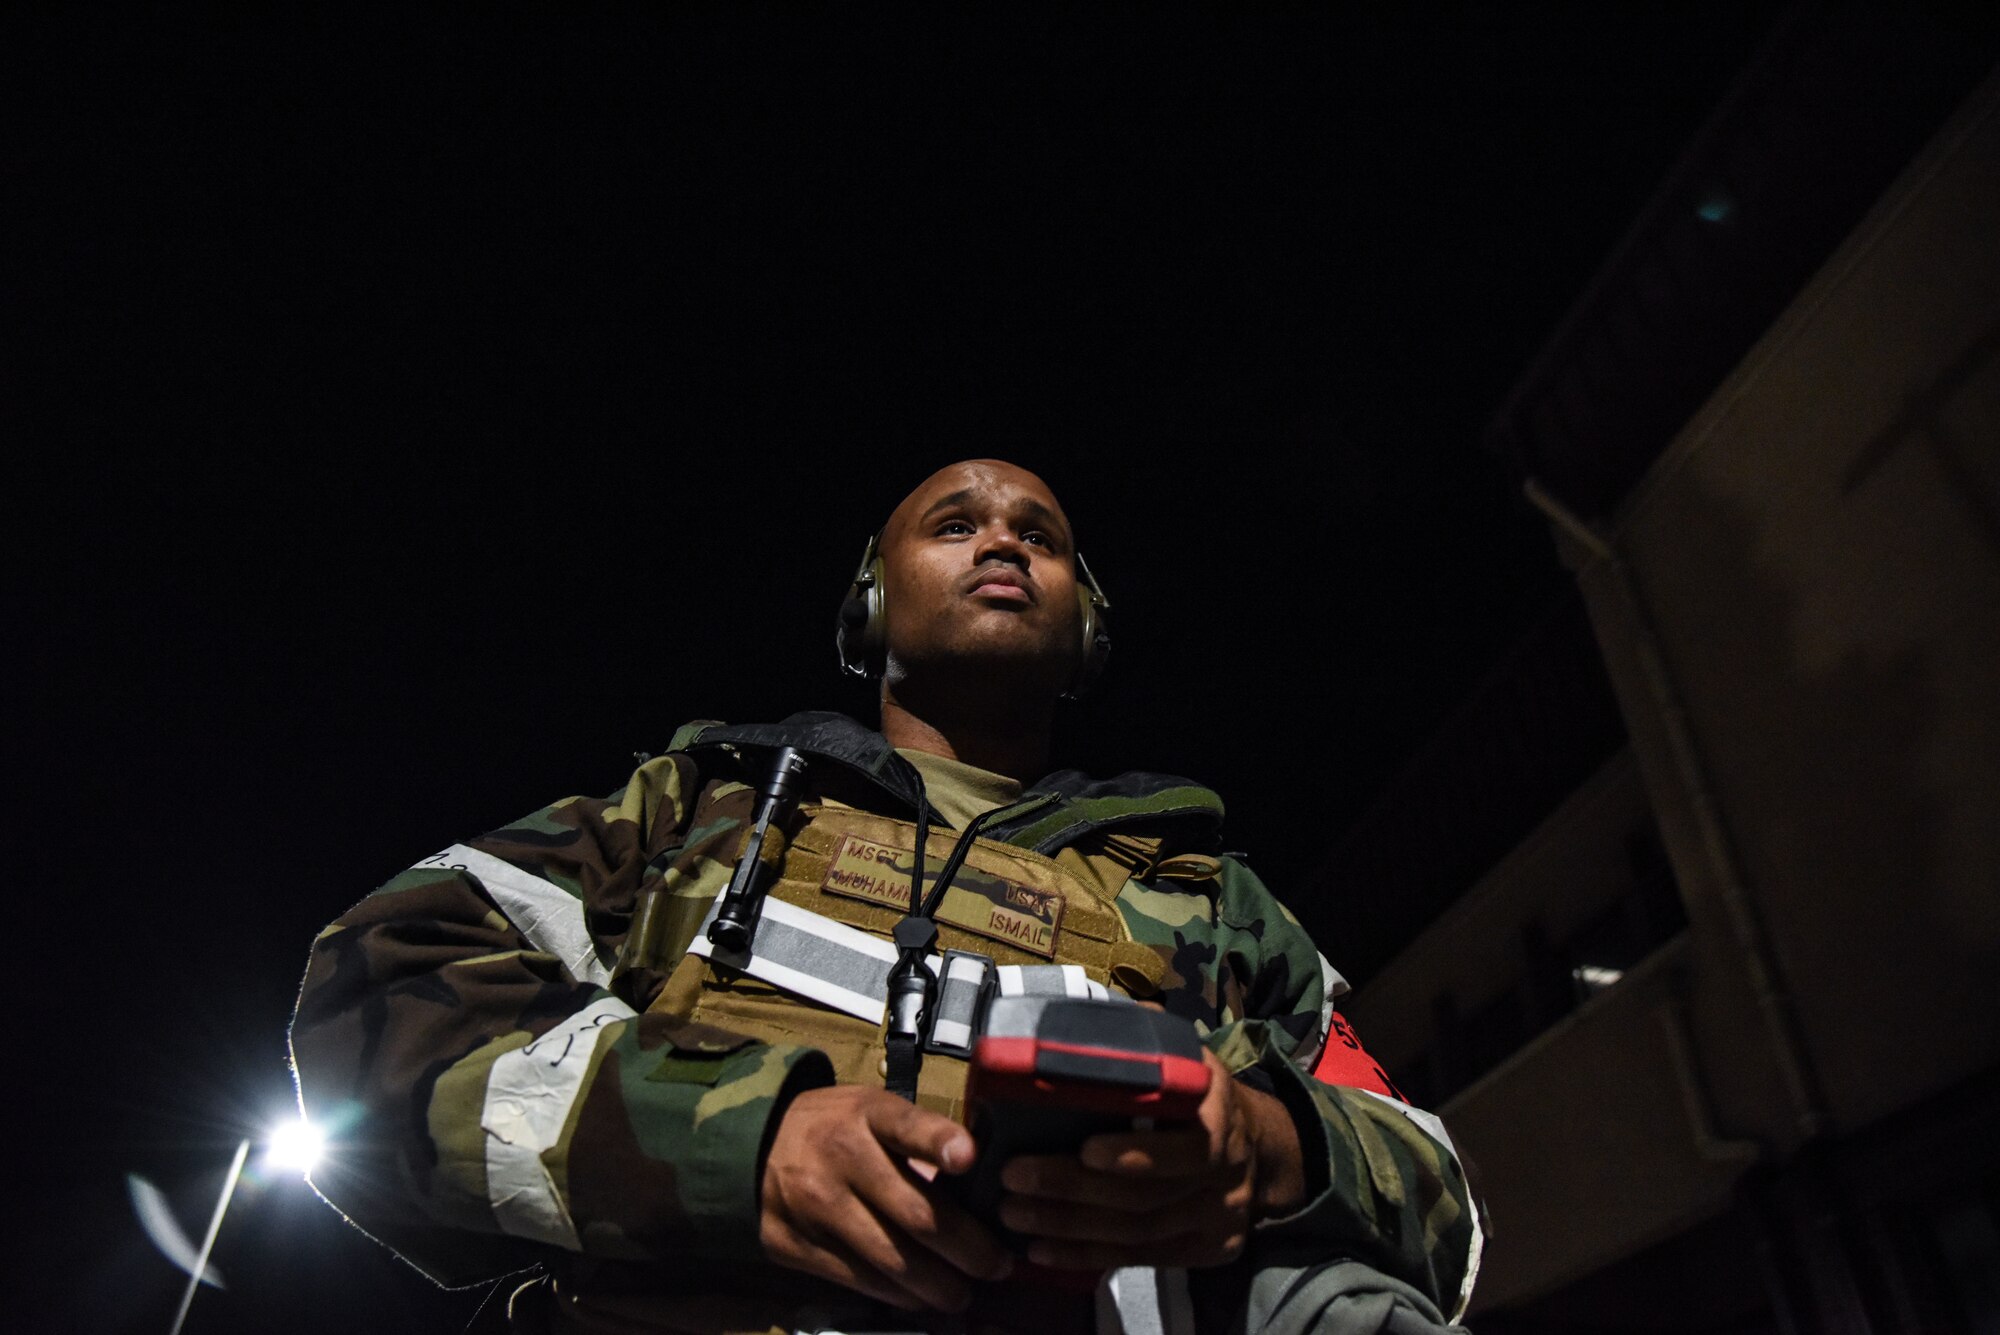 Master Sgt. Ismail Muhammad, 51st Fighter Wing Inspector General, prepares to evaluate Airmen during a training event